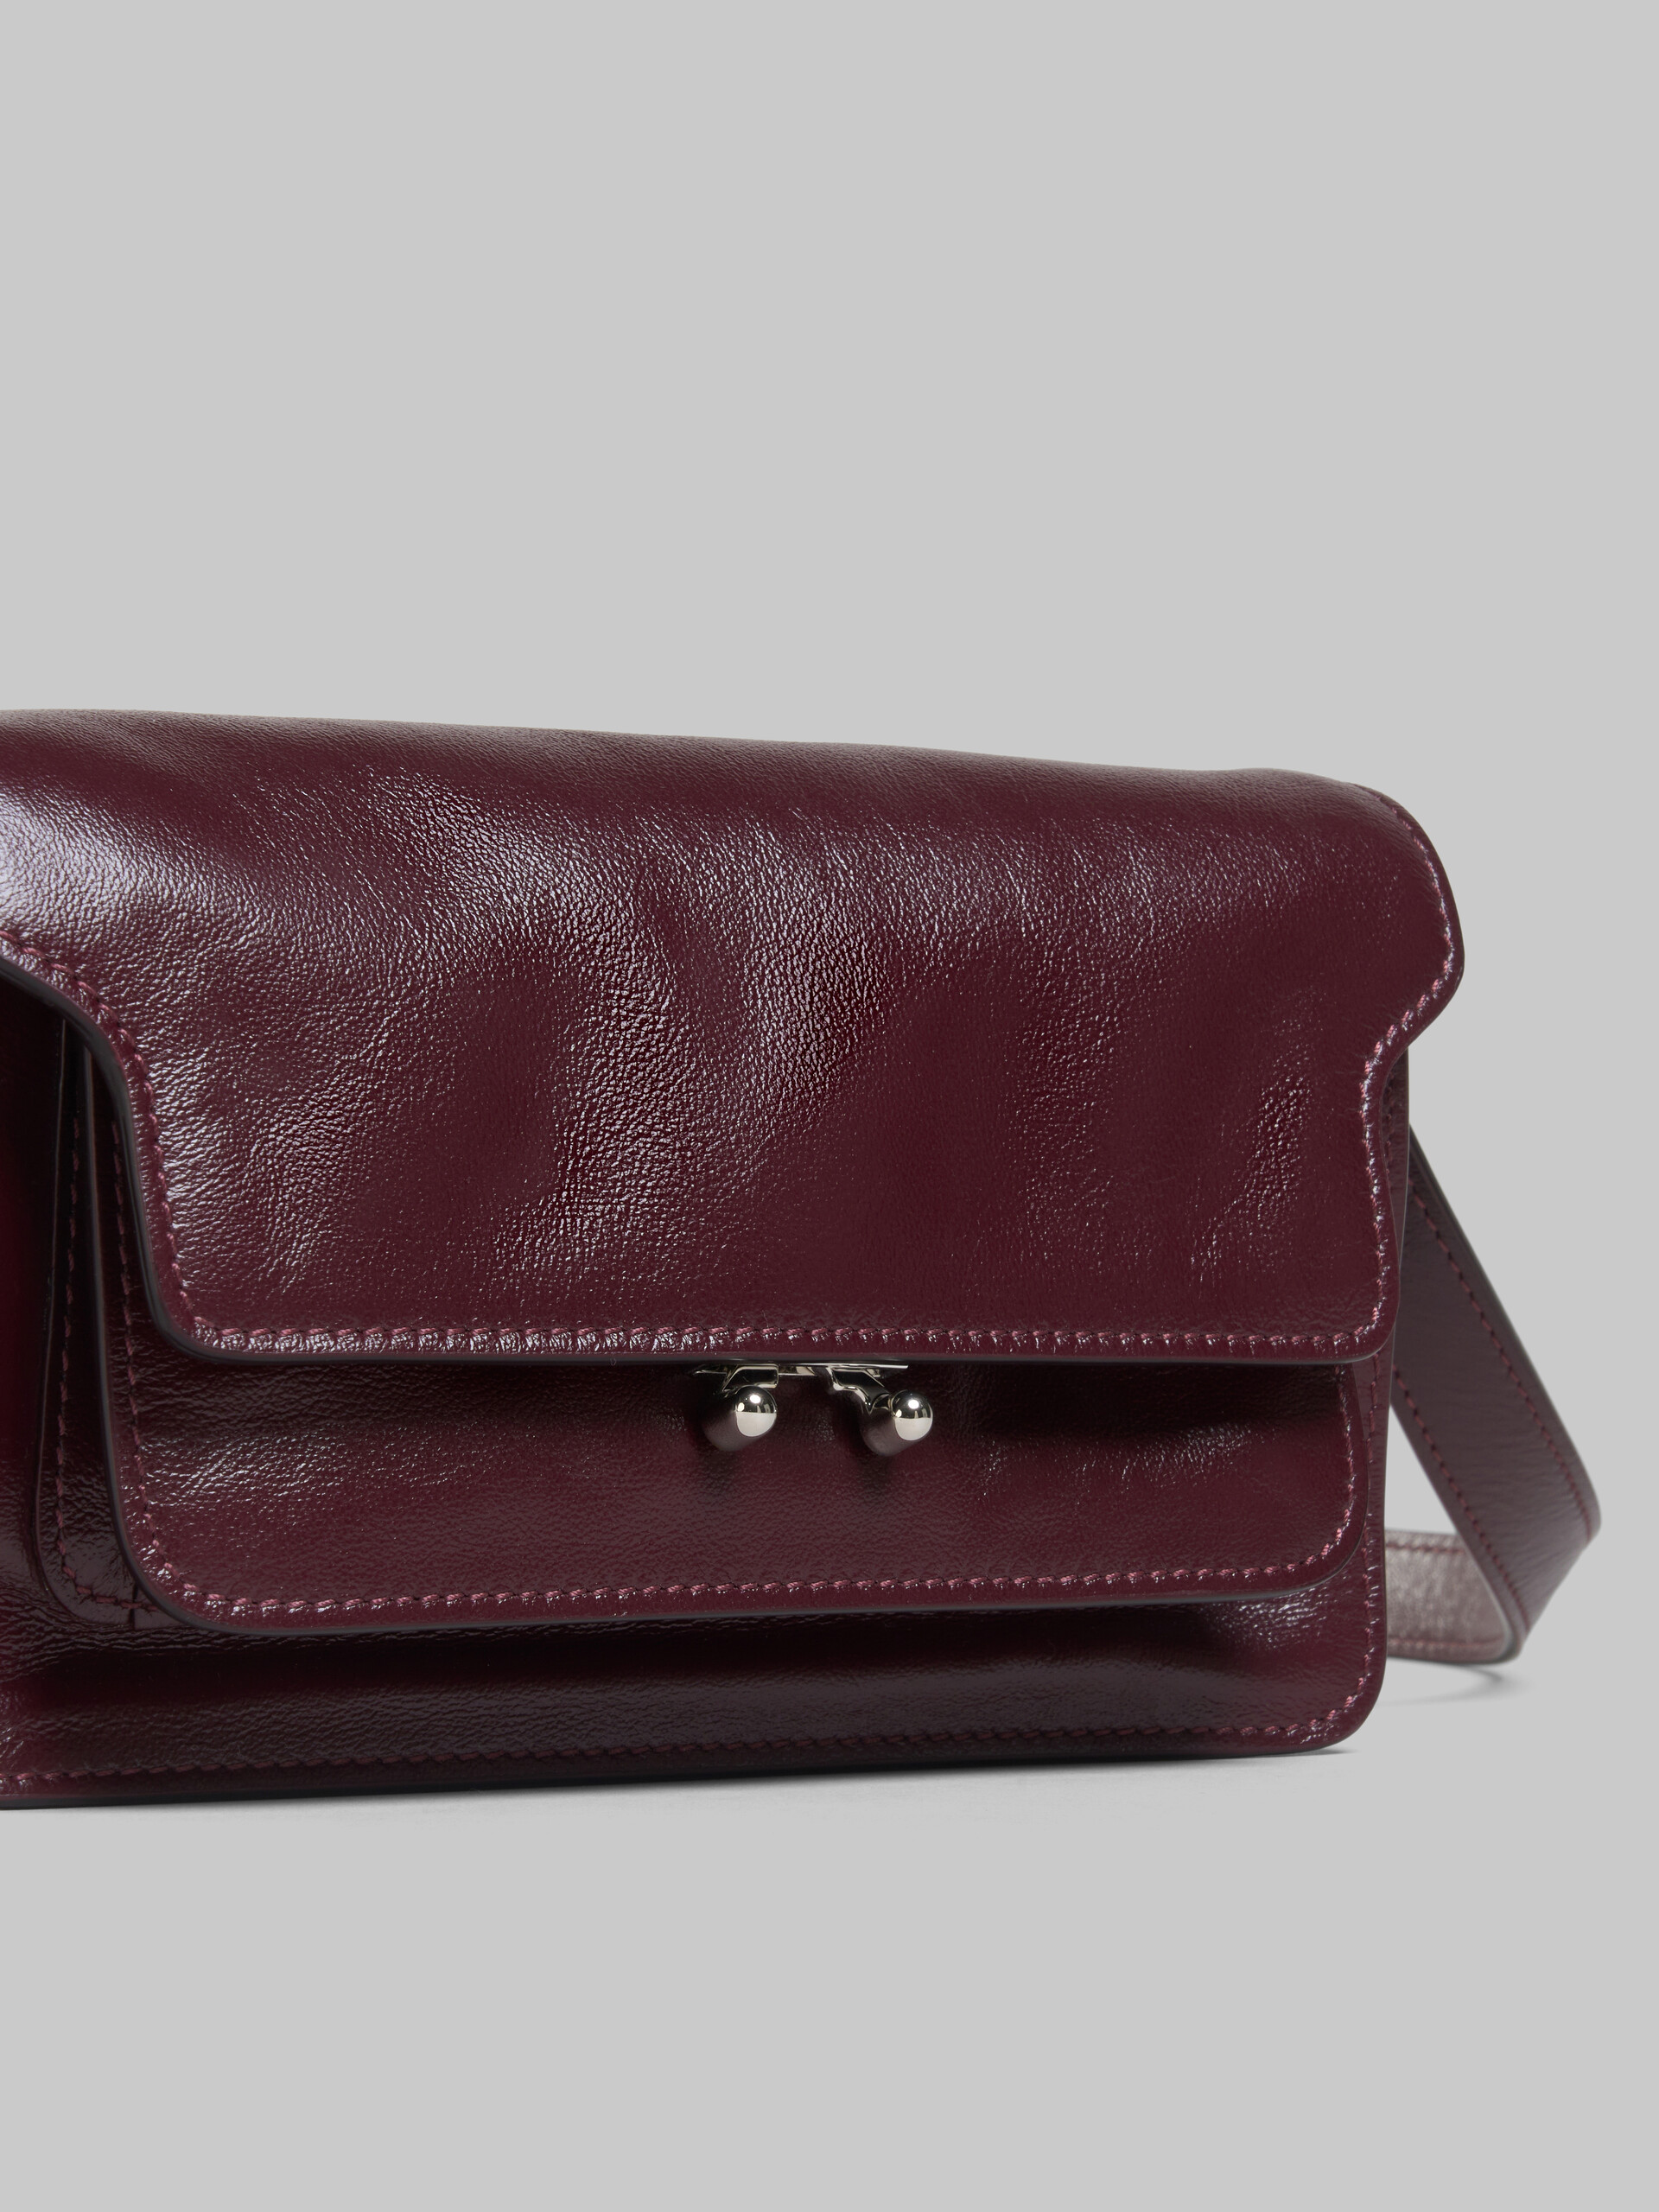 Red leather Trunk Soft bag